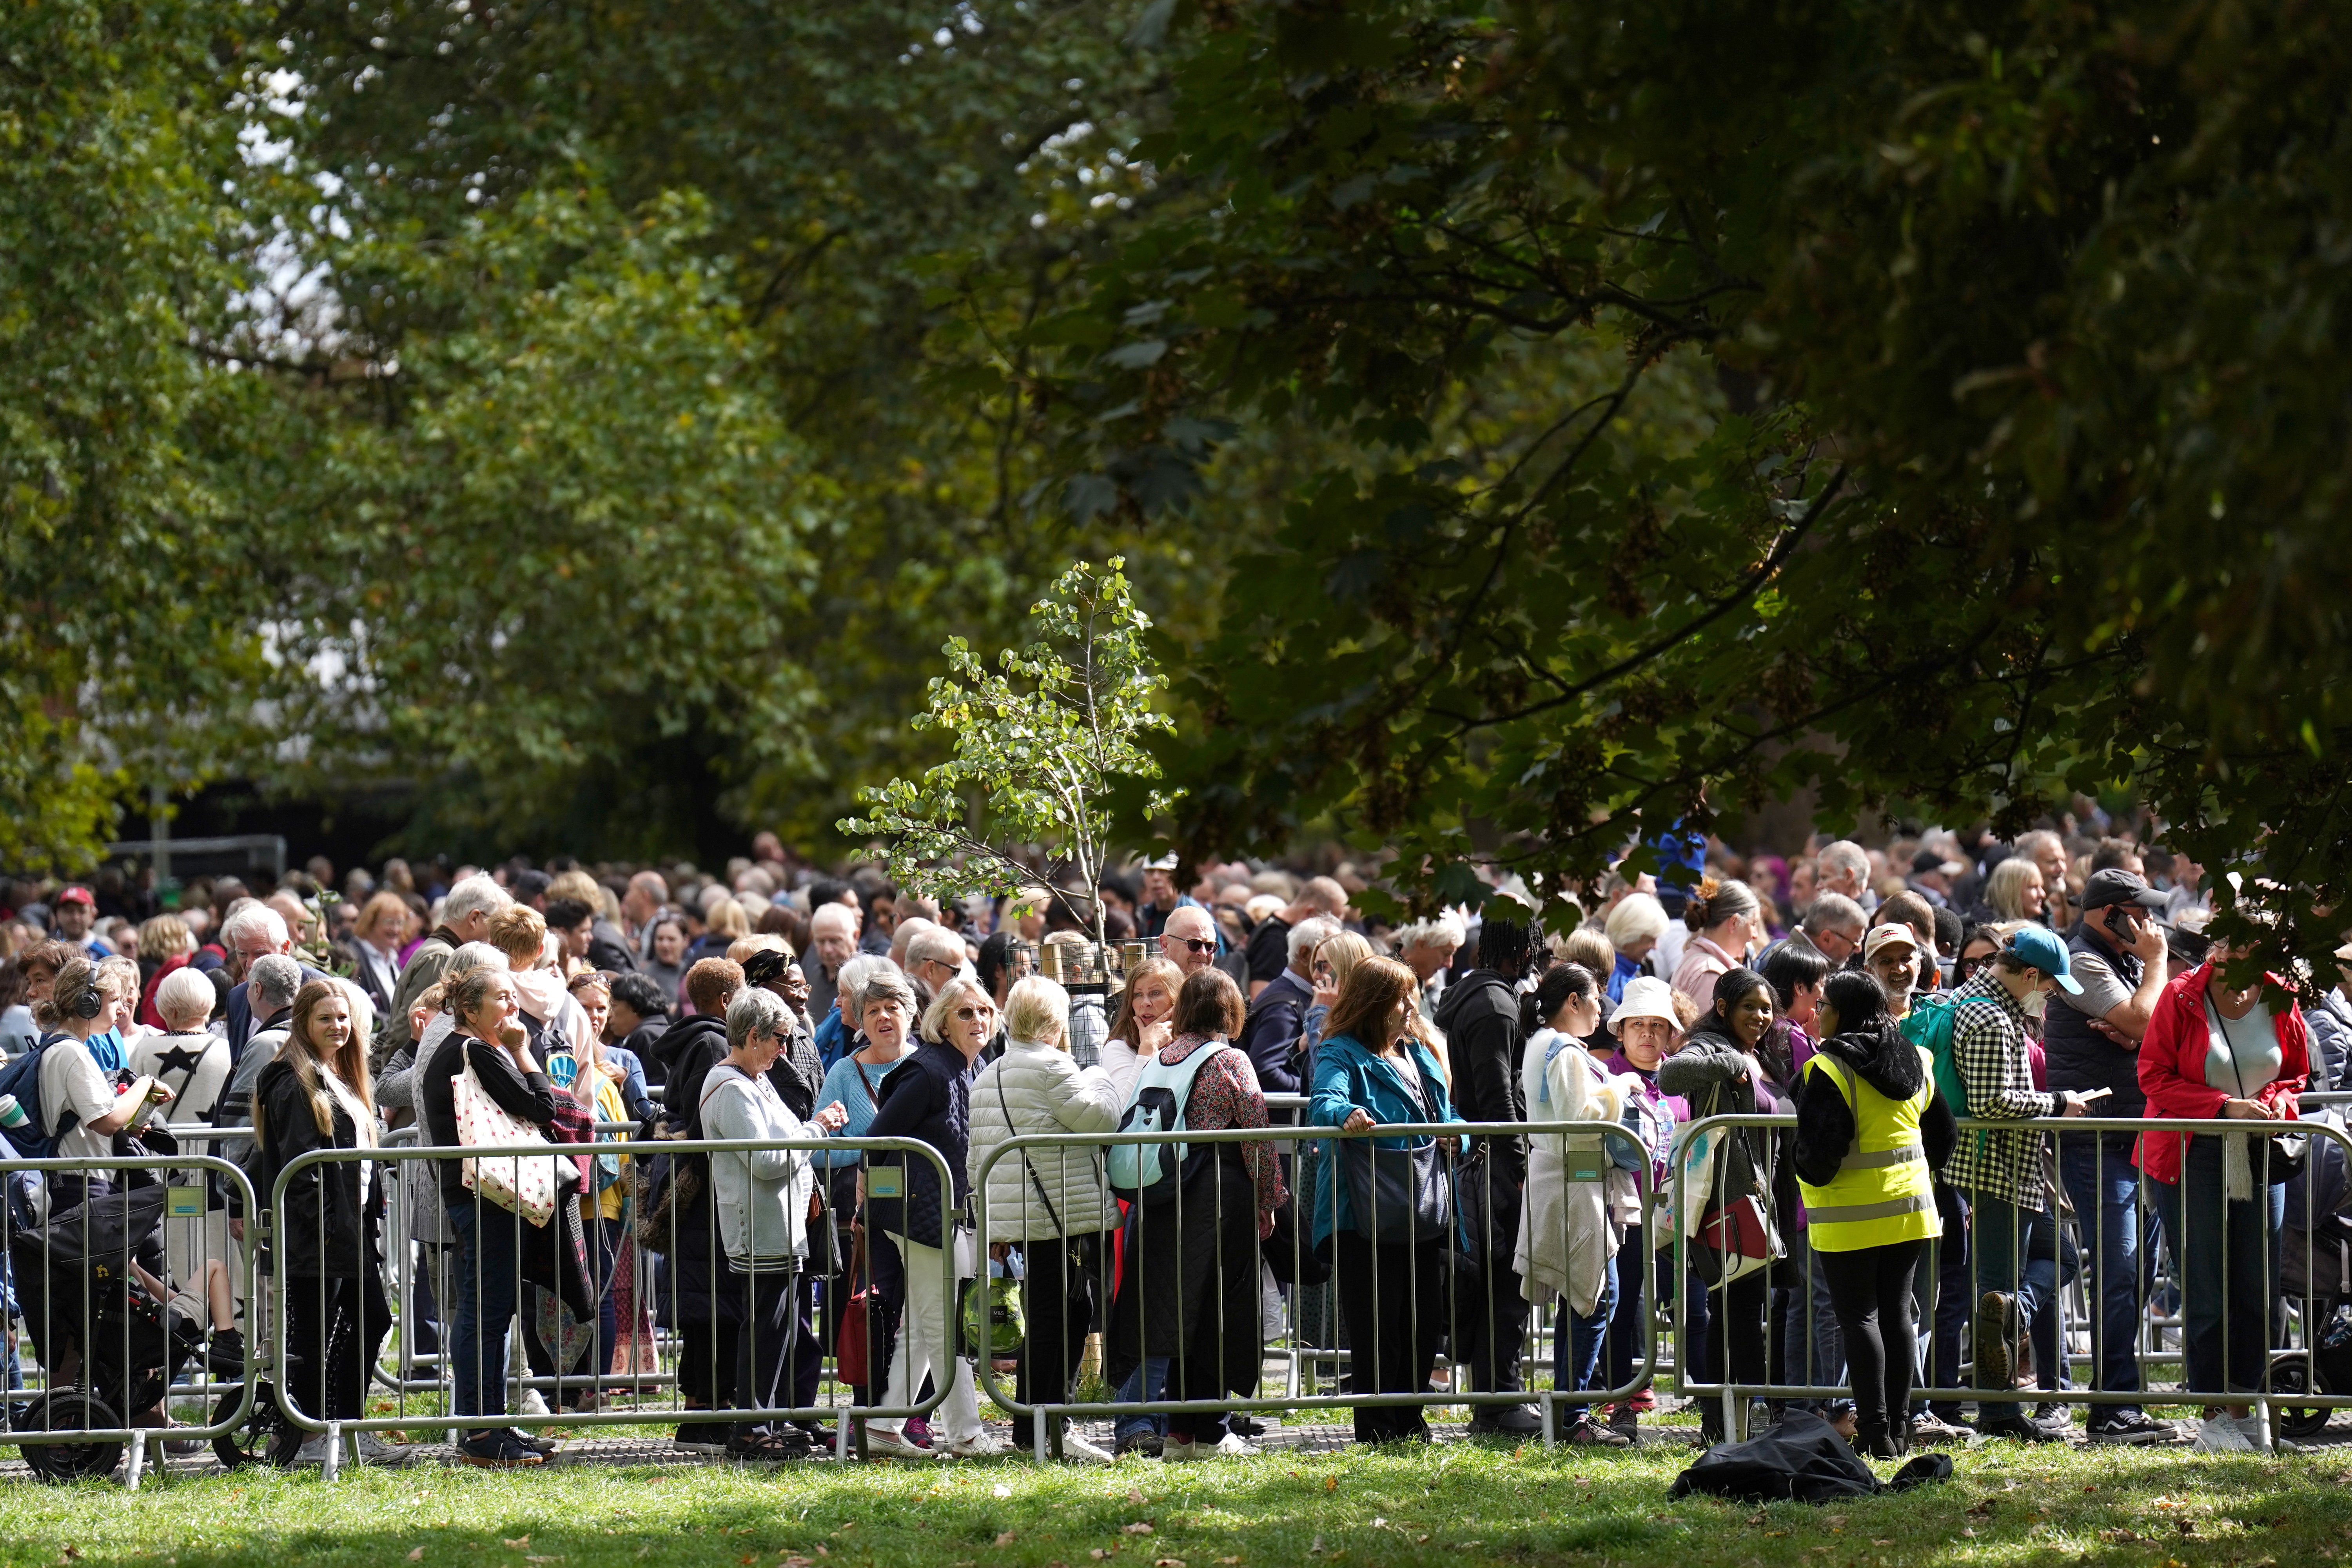 Members of the public in the queue at Southwark Park in London (James Manning/PA)